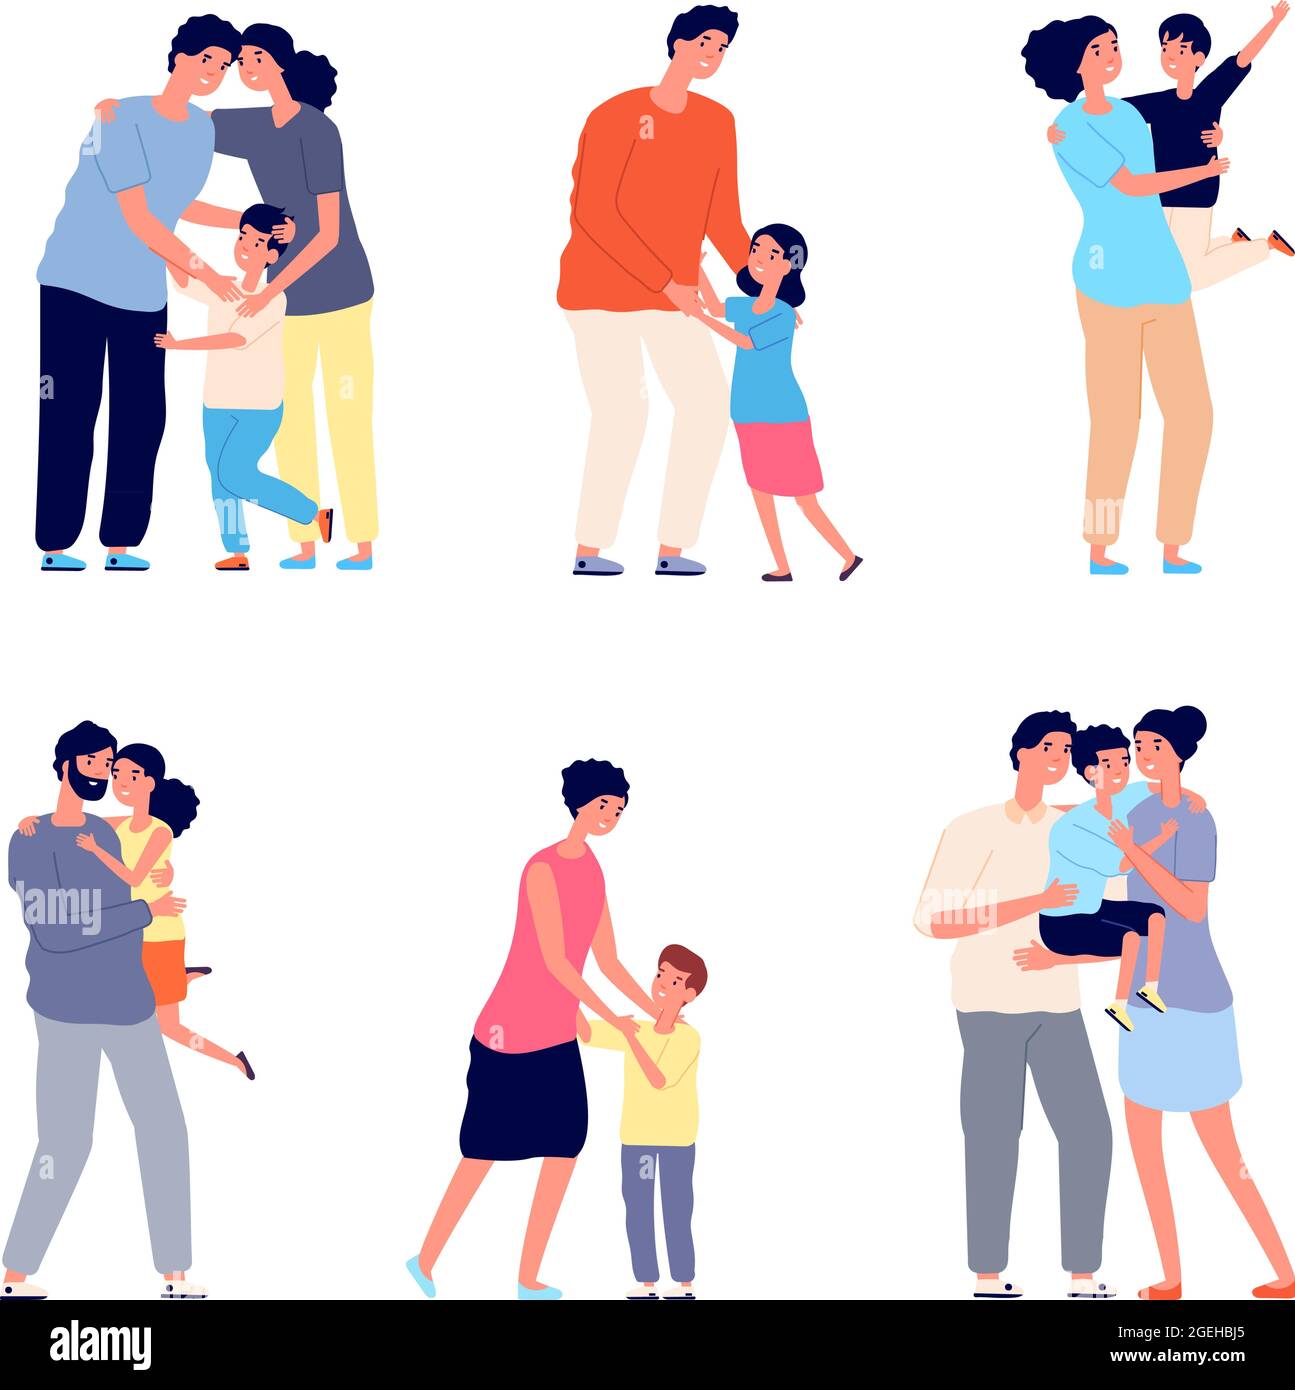 Parents hugging child. Family embracing, dad mom hug daughter. Friendship romantic relationship, adult holding baby utter vector characters Stock Vector